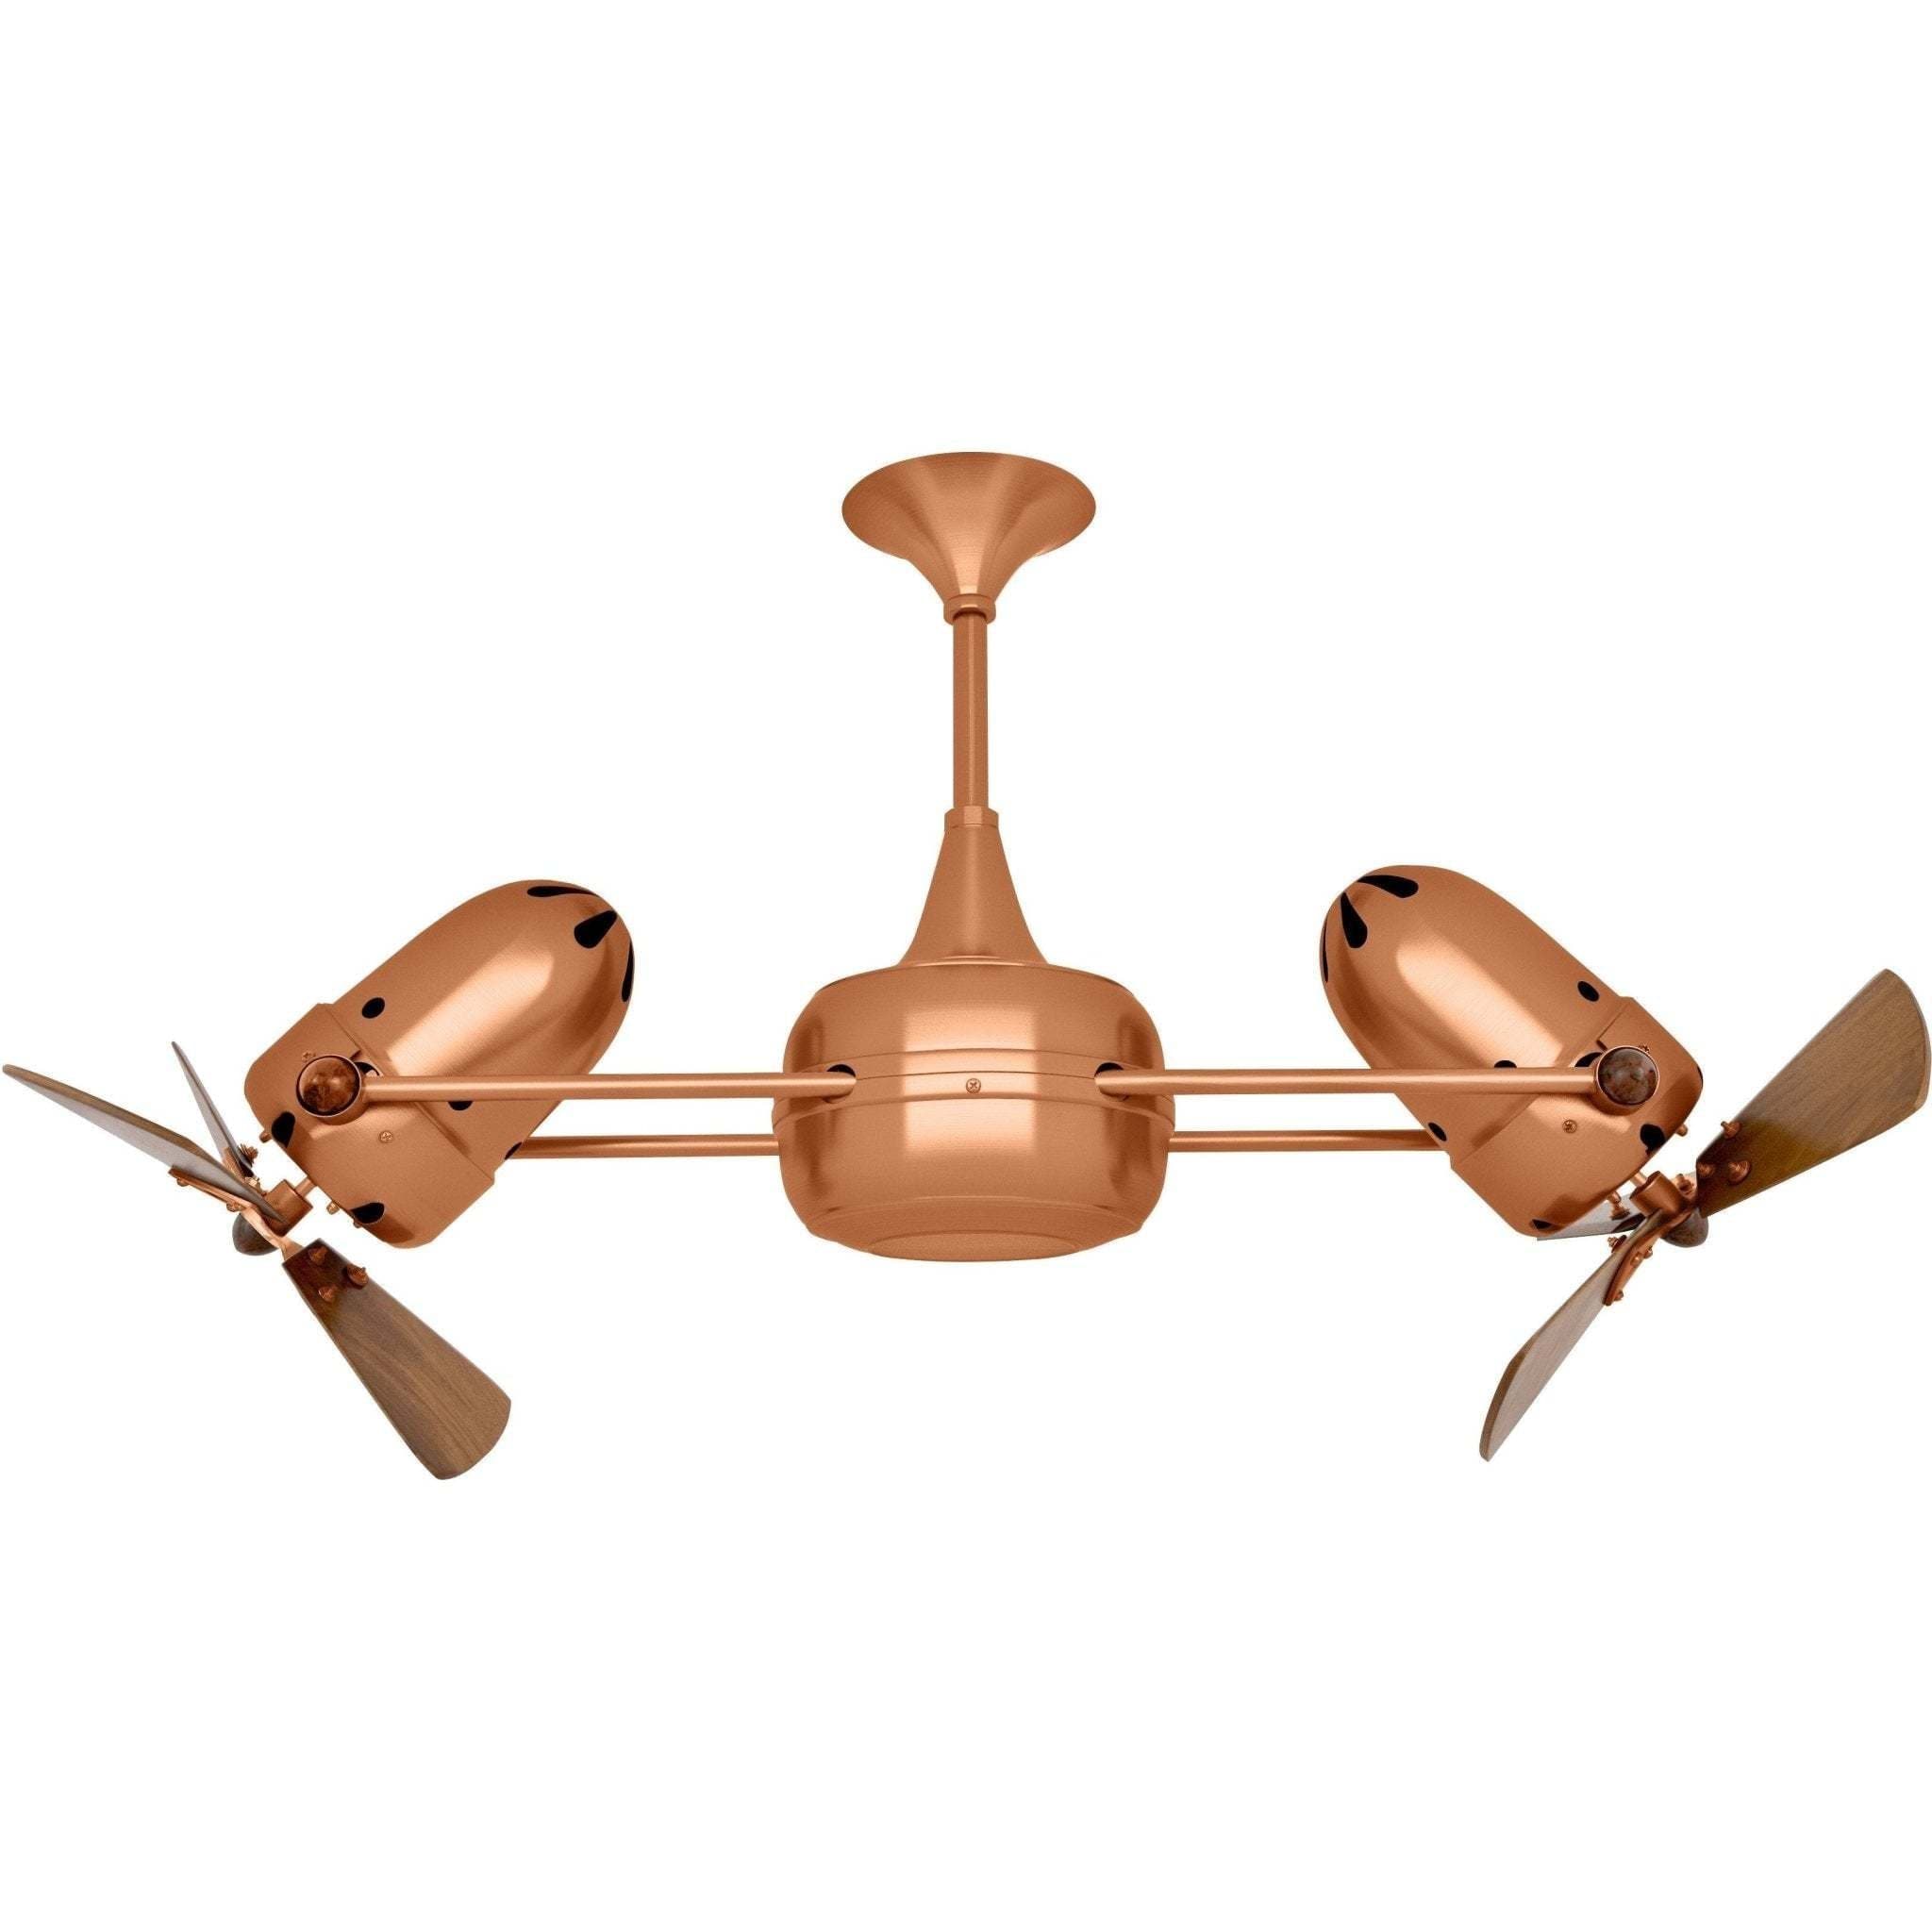 Shown in Brushed Copper (no image available) 